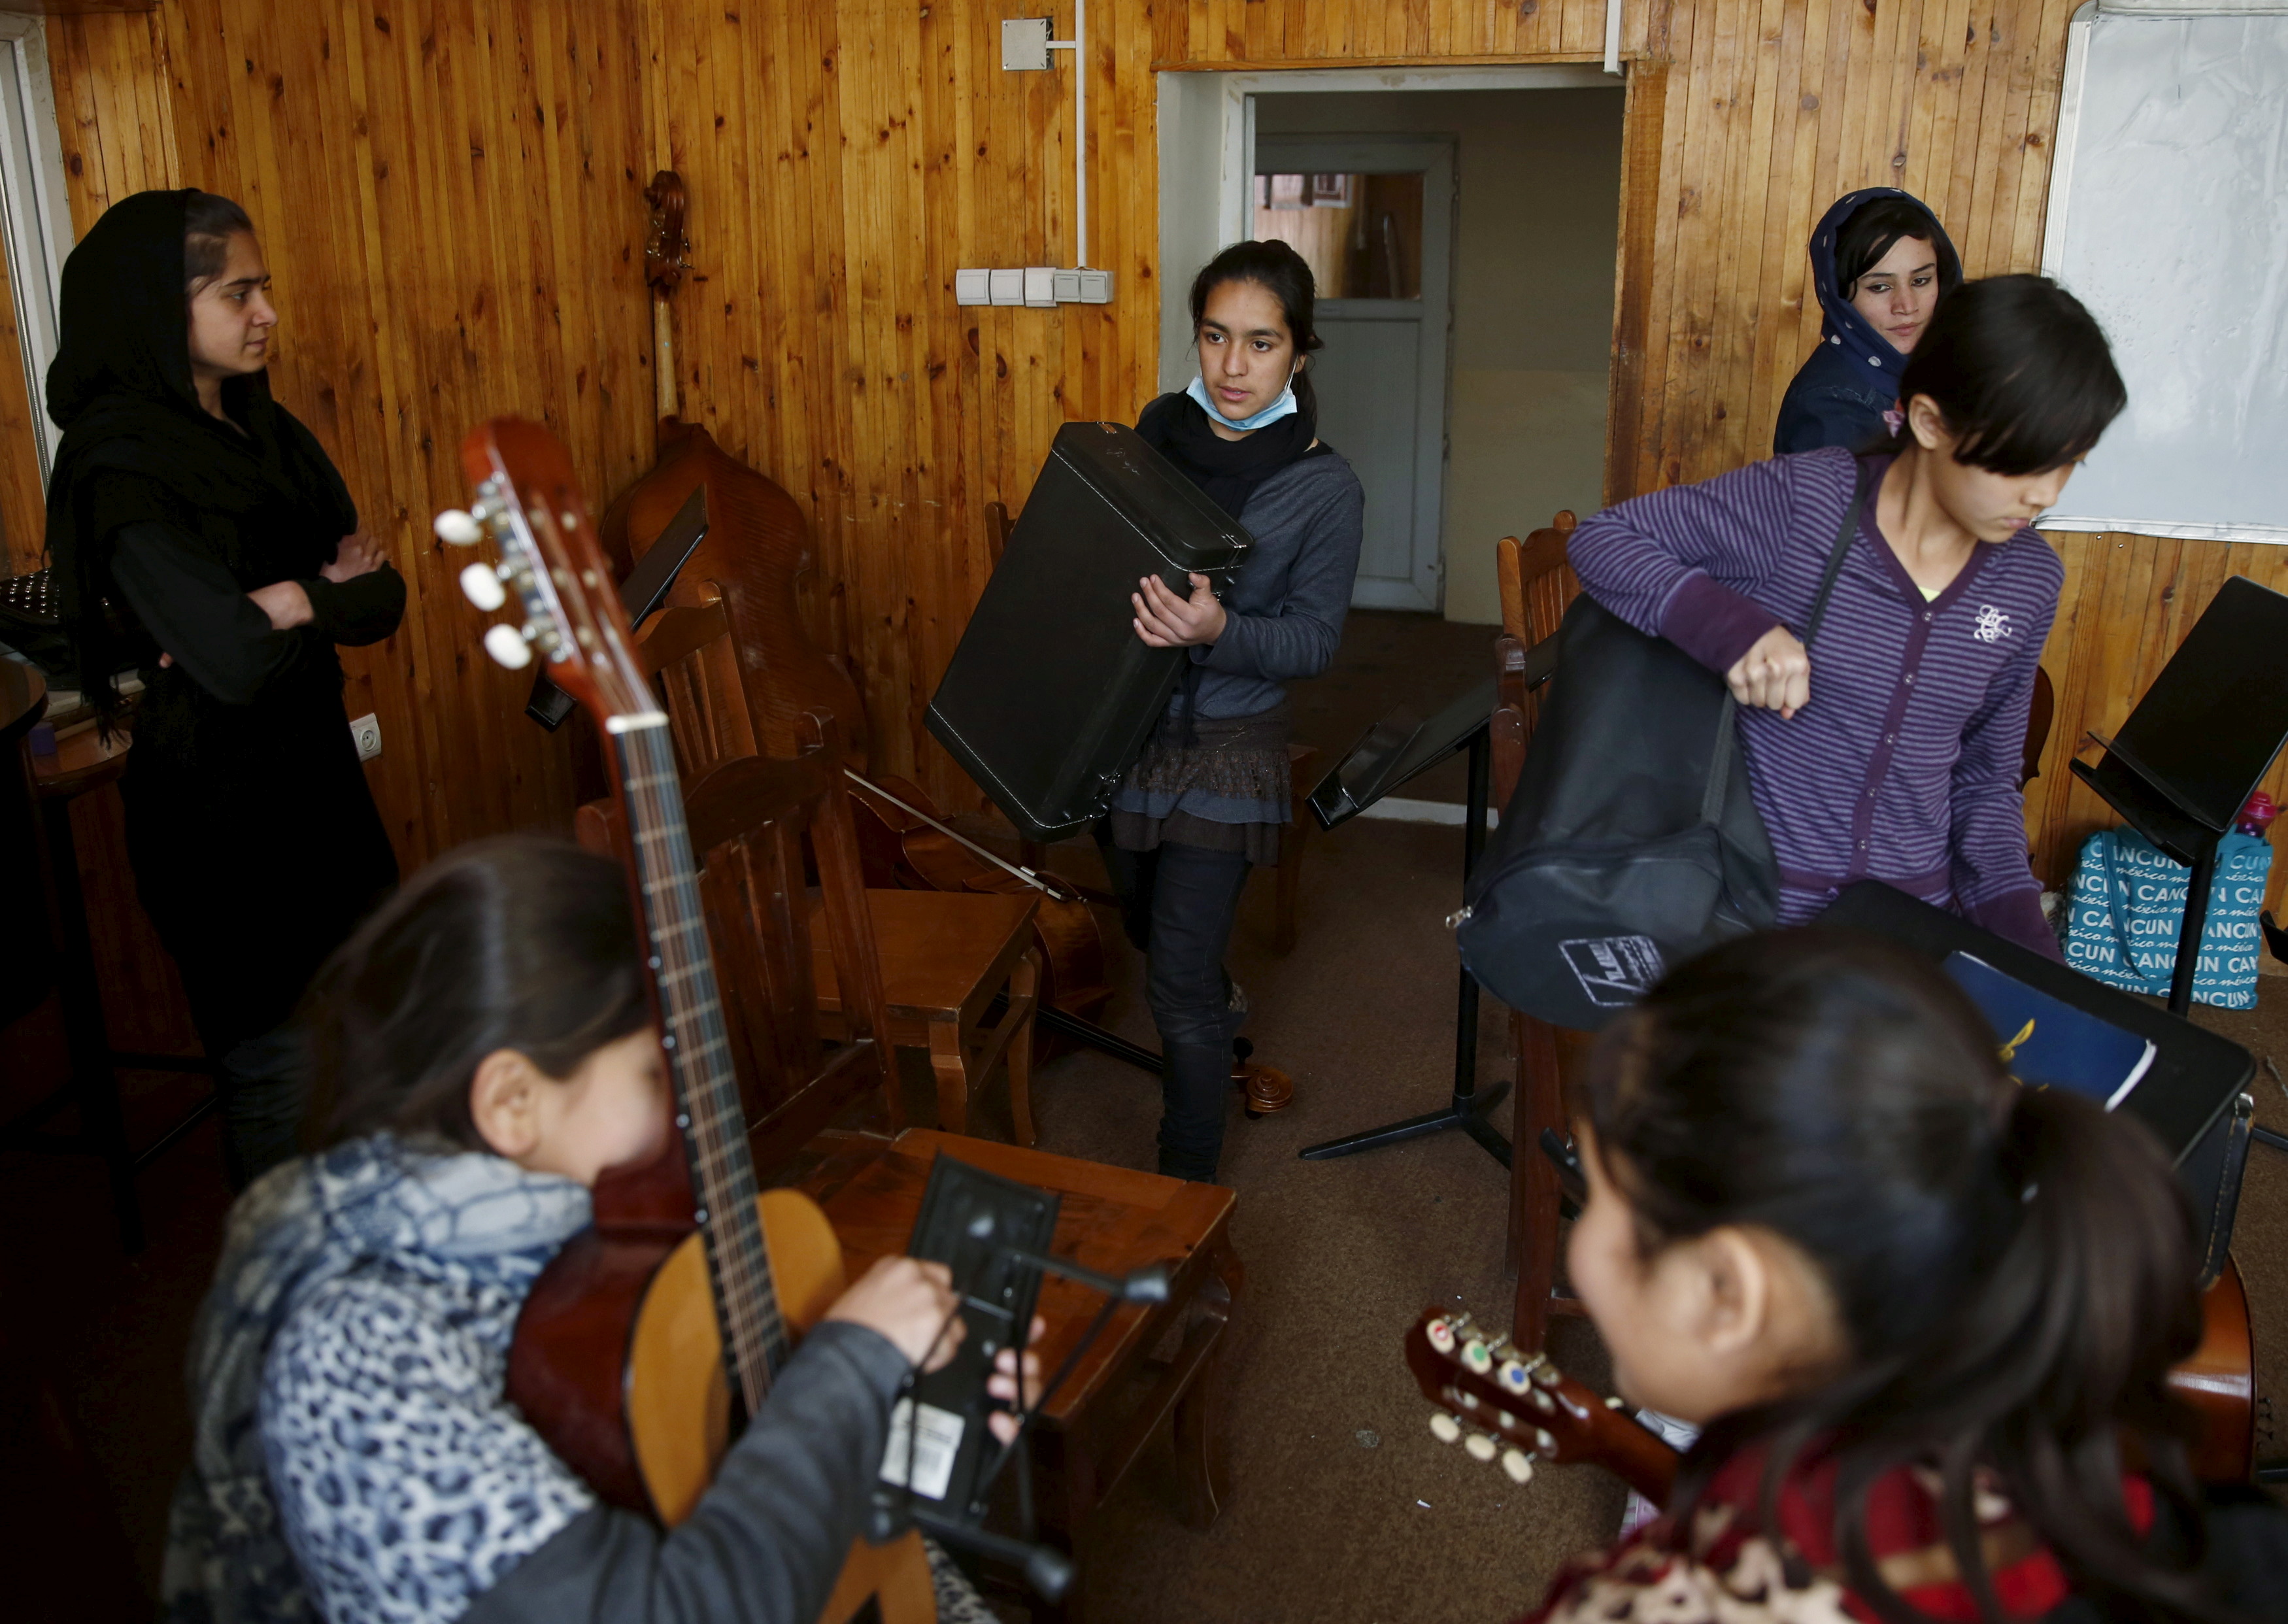 Members of the Zohra orchestra, an ensemble of 35 women, practises during a session, at Afghanistan's National Institute of Music, in Kabul